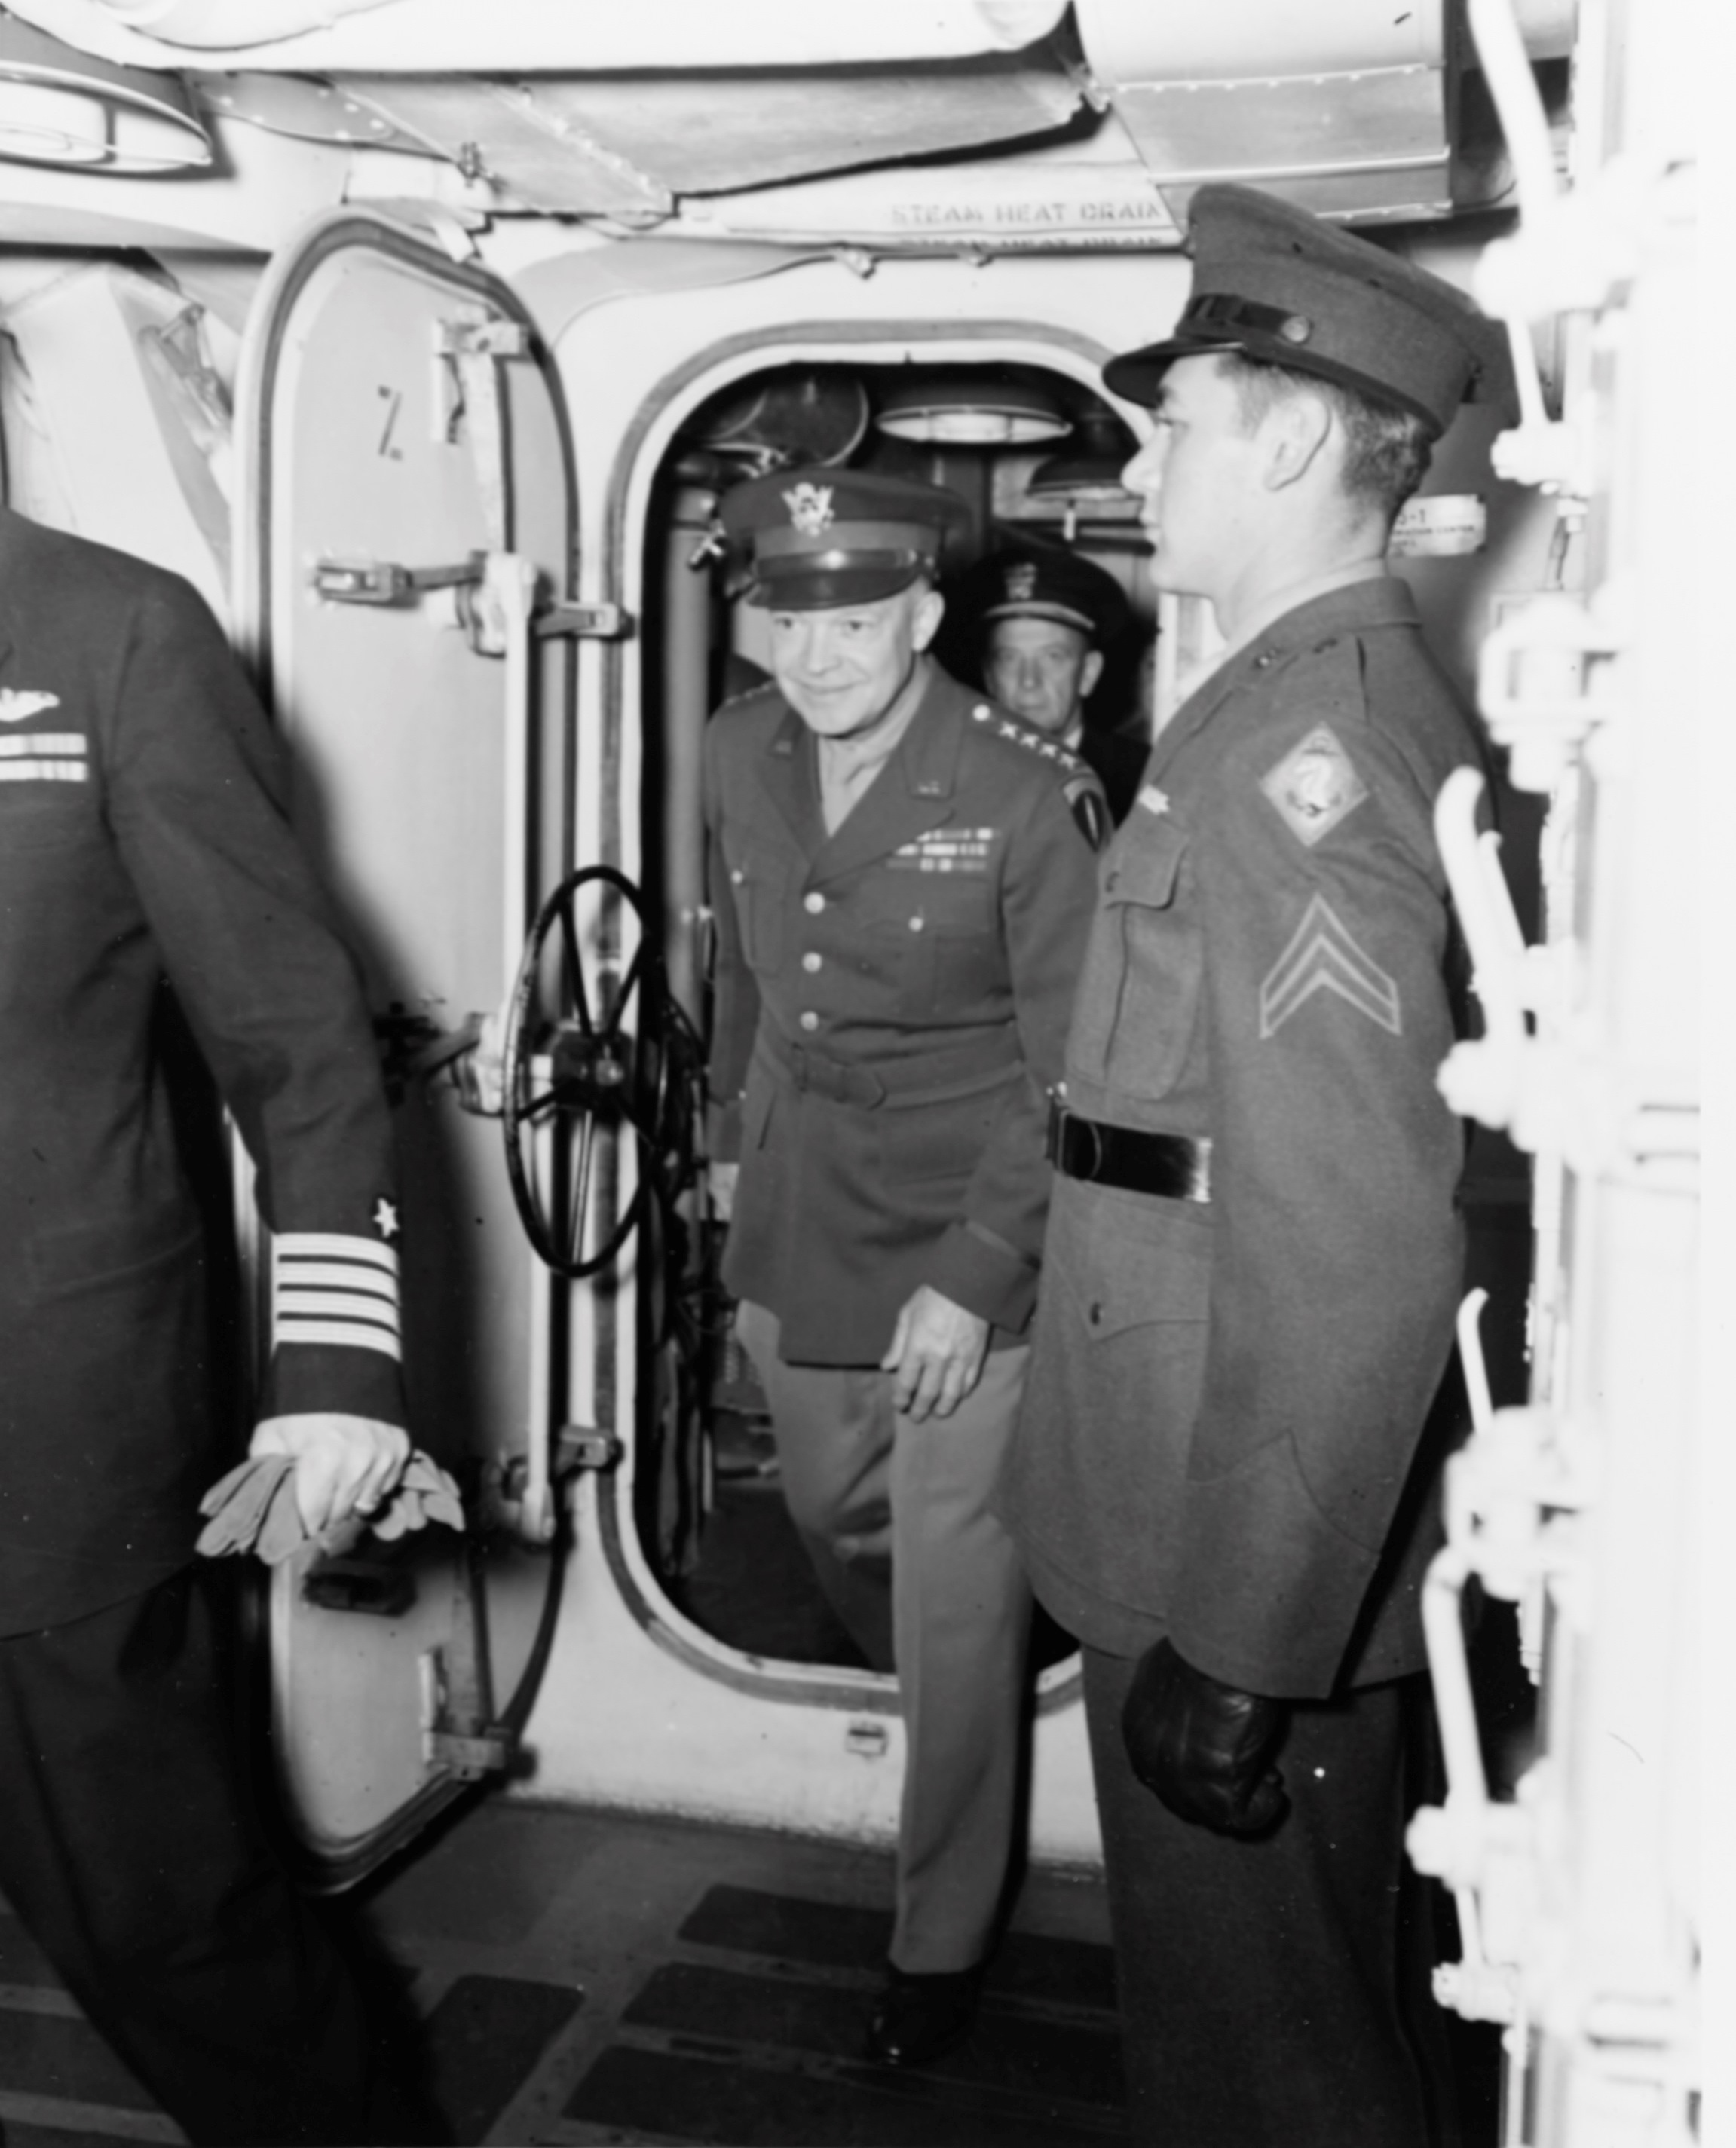 General Dwight Eisenhower making an inspection visit aboard the cruiser USS Quincy (Baltimore-class) at Belfast Lough, Belfast, Northern Ireland, United Kingdom, 19 May 1944. Rear Admiral Alan Kirk is behind him.